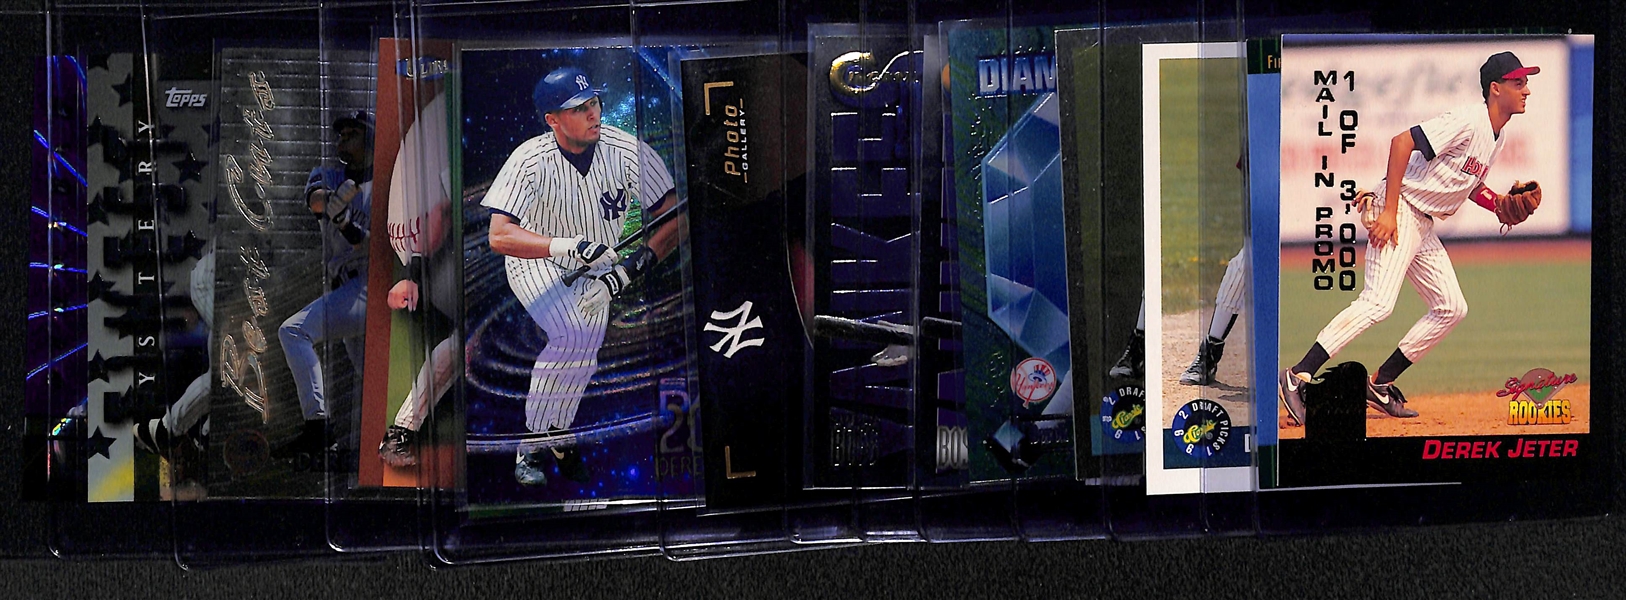 (14) Derek Jeter Cards - Includes (4) Rookie Cards w. Many Short Print and Variation Cards